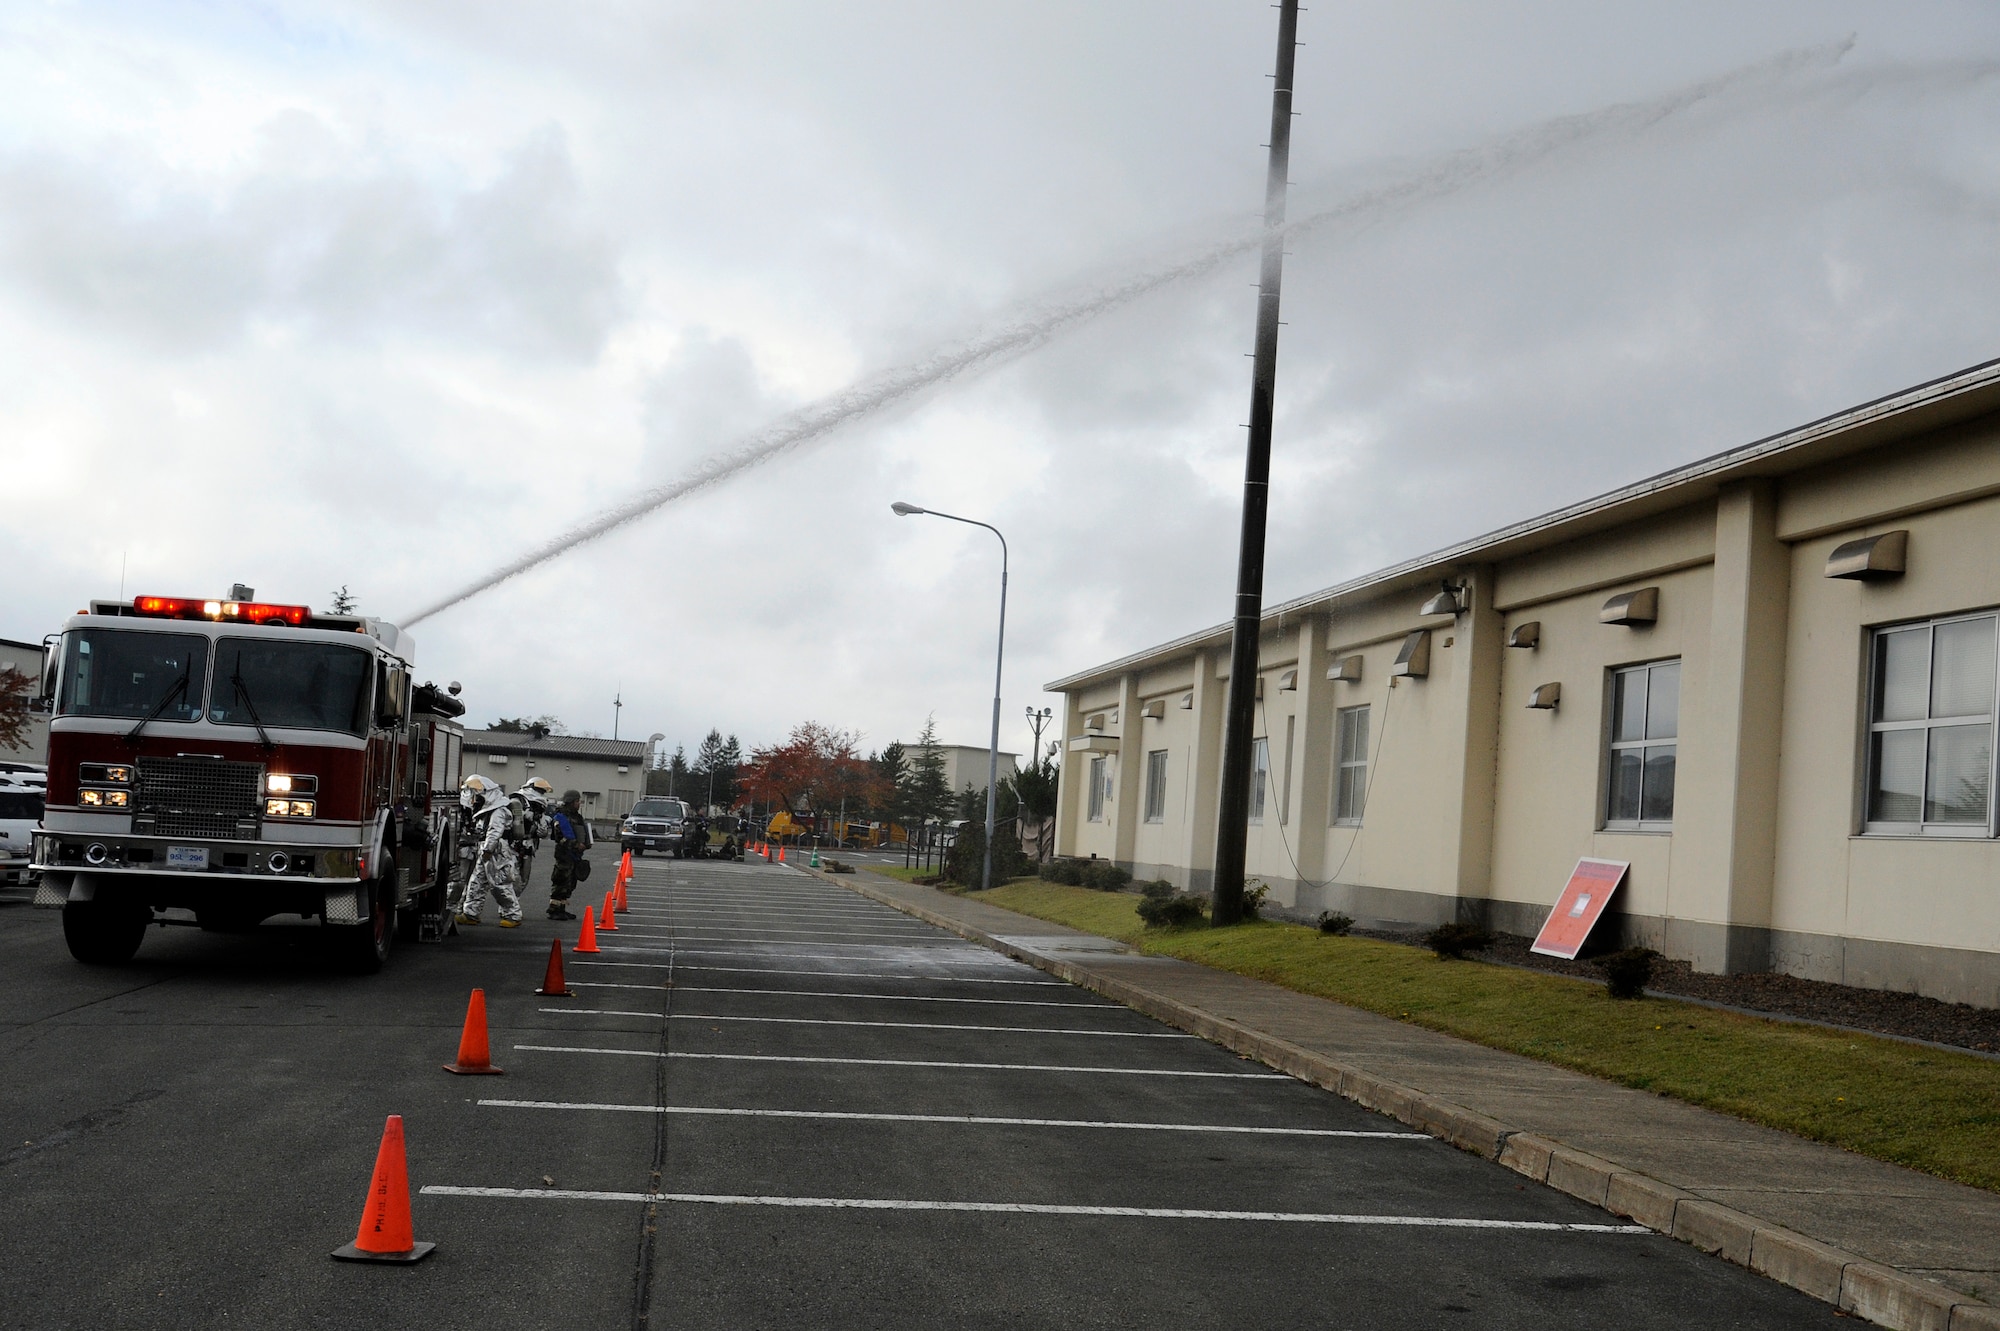 MISAWA AIR BASE, Japan - The 35th Civil Engineer Squadron’s fire department responds to a mock fire after a simulated attack during an operational readiness exercise here Nov. 7. The 35th Fighter Wing is taking part in an ORE in preparation for inspection next month. (U.S. Air Force photo/Tech. Sgt. Marie Brown) 